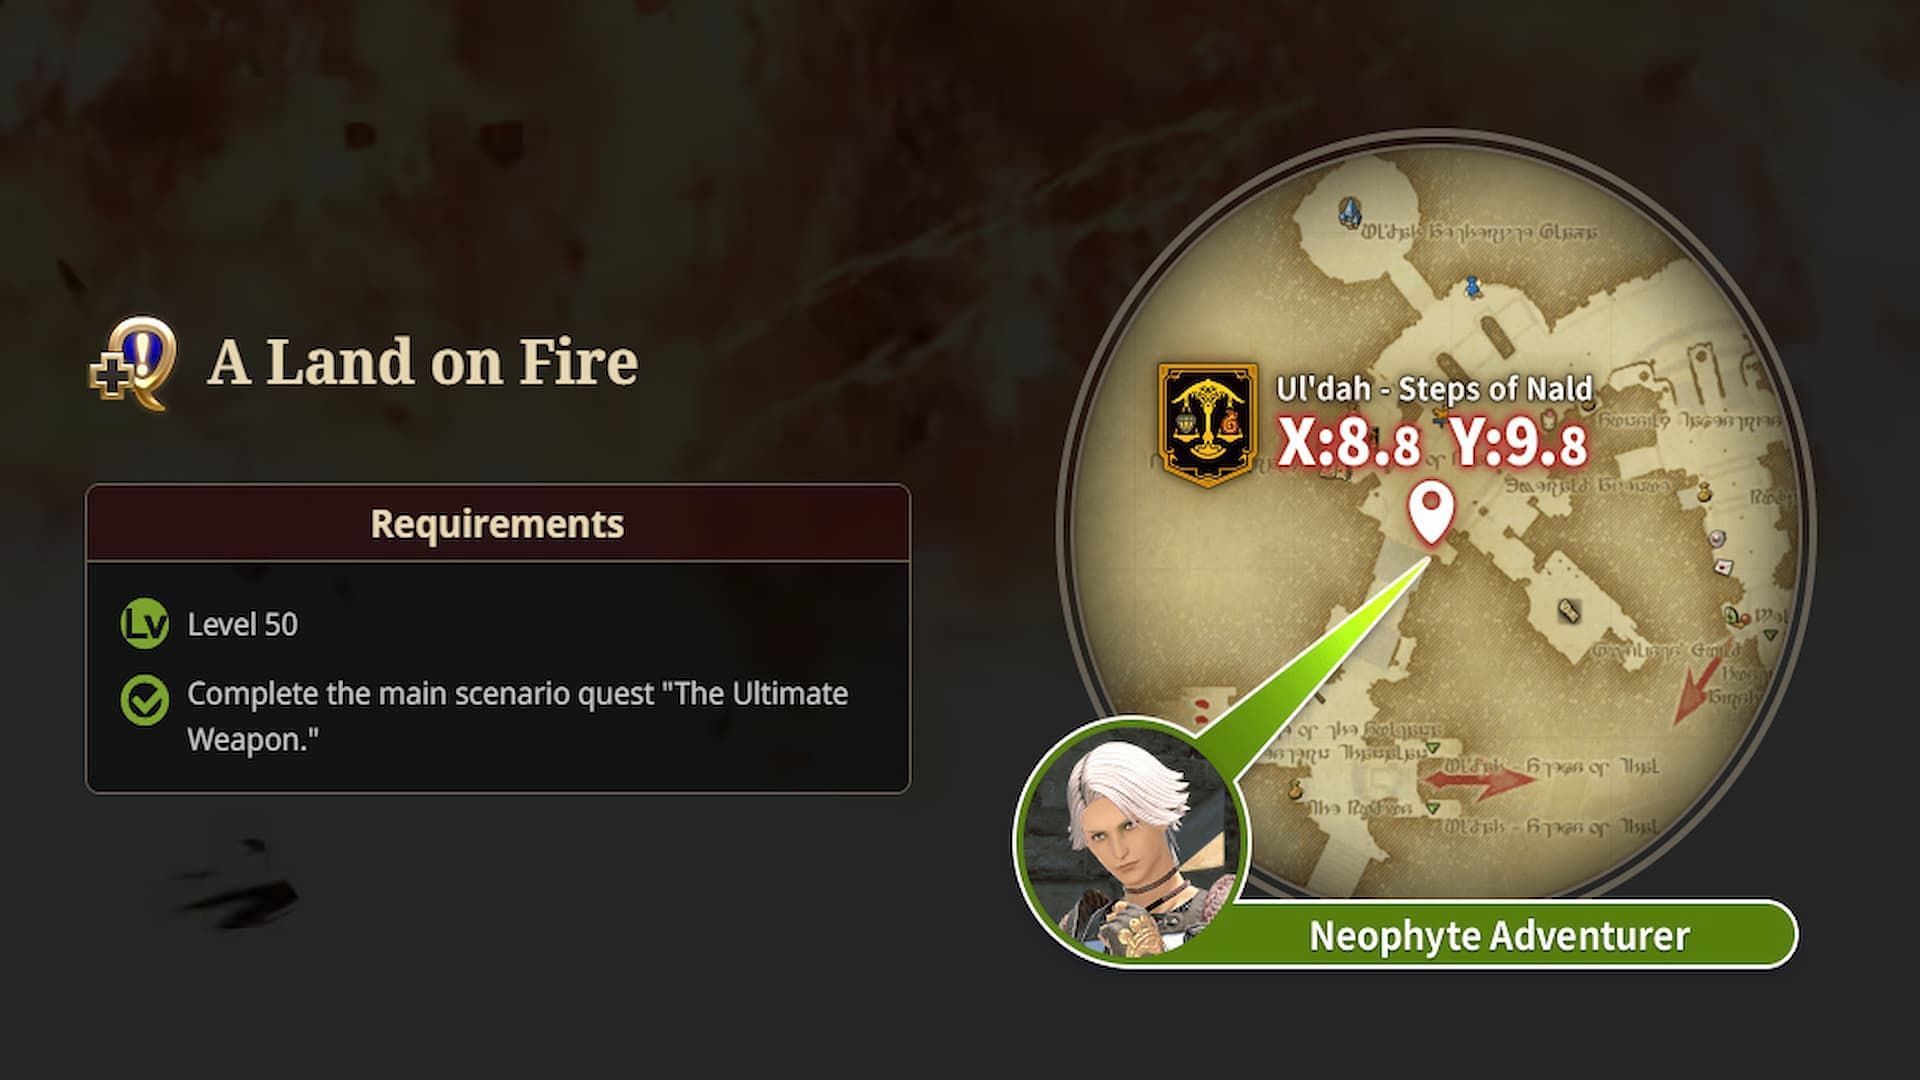 A Land on Fire questline in Final Fantasy 14 (Image via Square Enix) Players can acquire the following rewards by participating in this event: Players can acquire the following rewards by participating in this event: